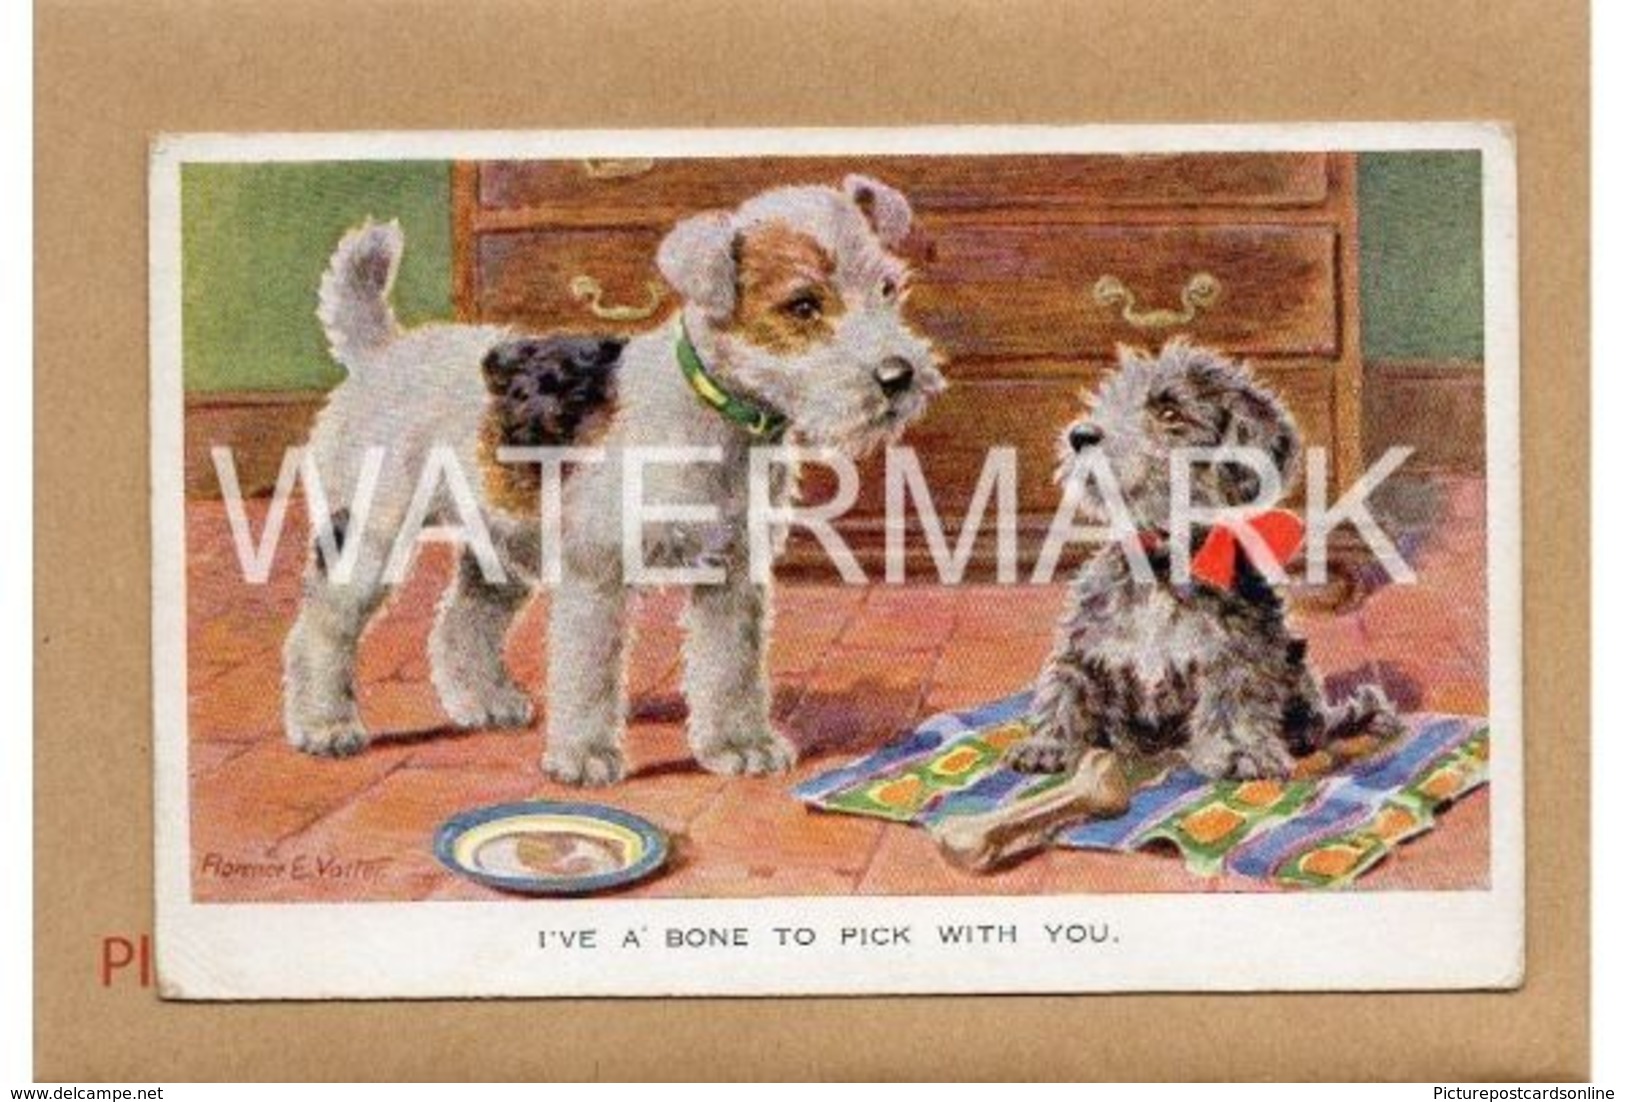 IVE A BONE TO PICK WITH YOU OLD COLOUR ART POSTCARD ARTIST SIGNED FLORENCE E VALTER 2 DOGS - Valter, Fl. E.